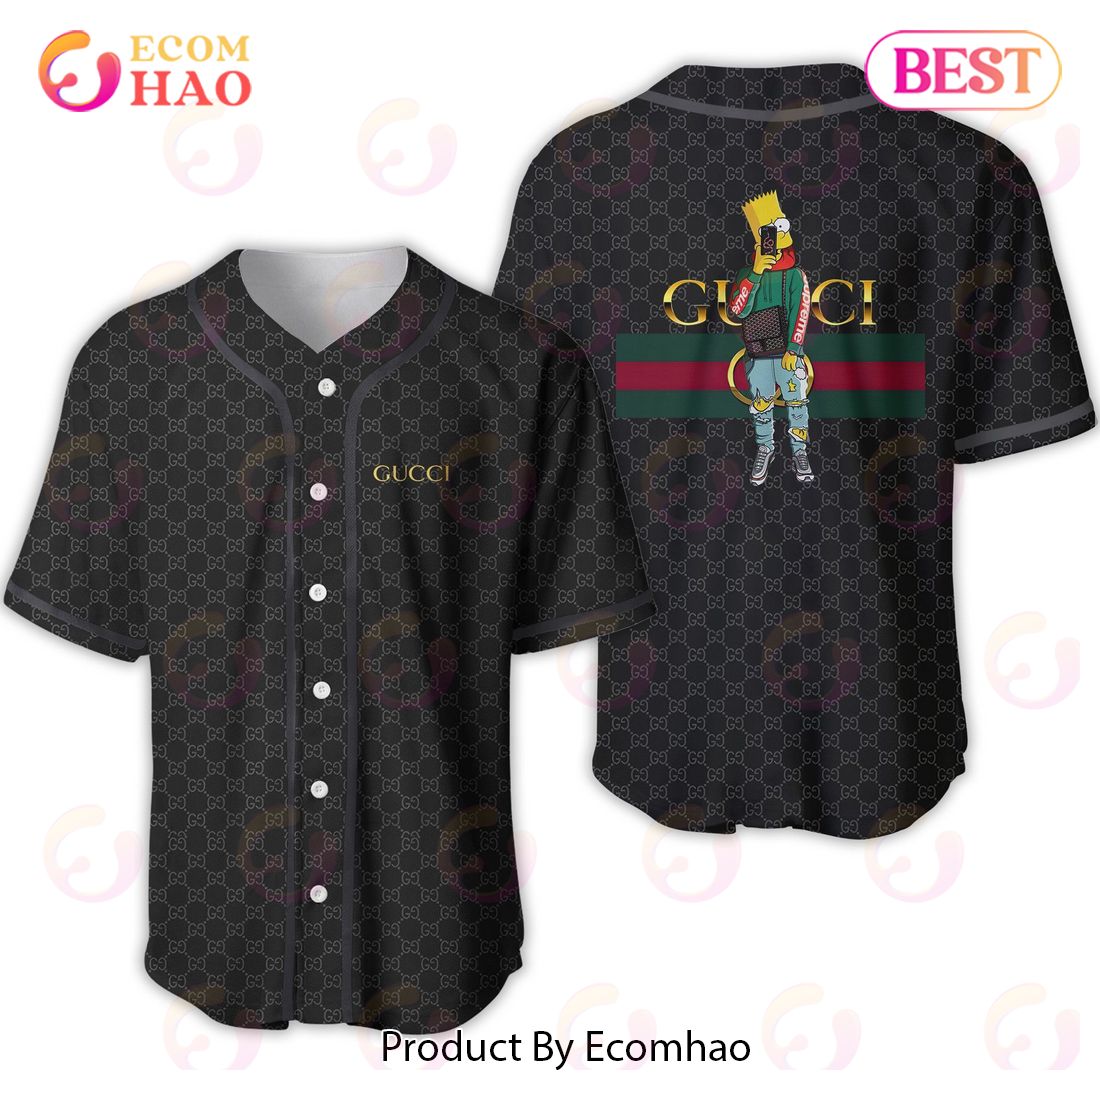 Gucci Bart Simpson Luxury Brand Jersey Limited Edition